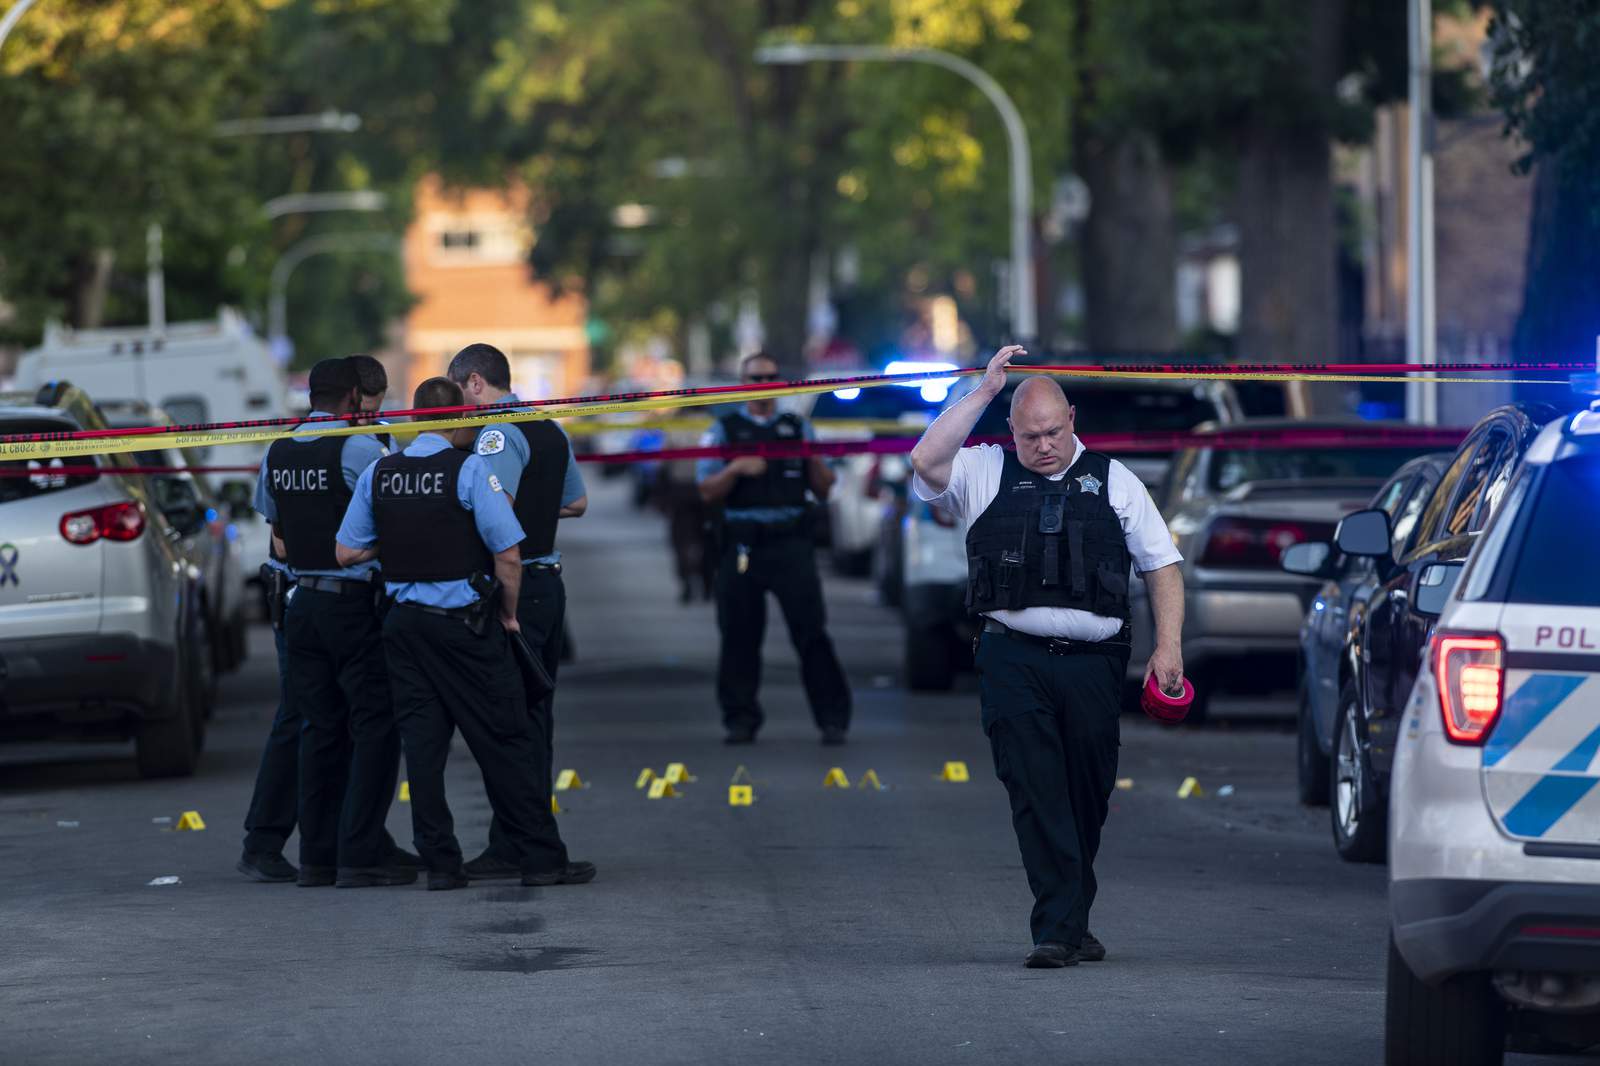 Chicago's July Fourth weekend ends with 17 dead, 70 wounded